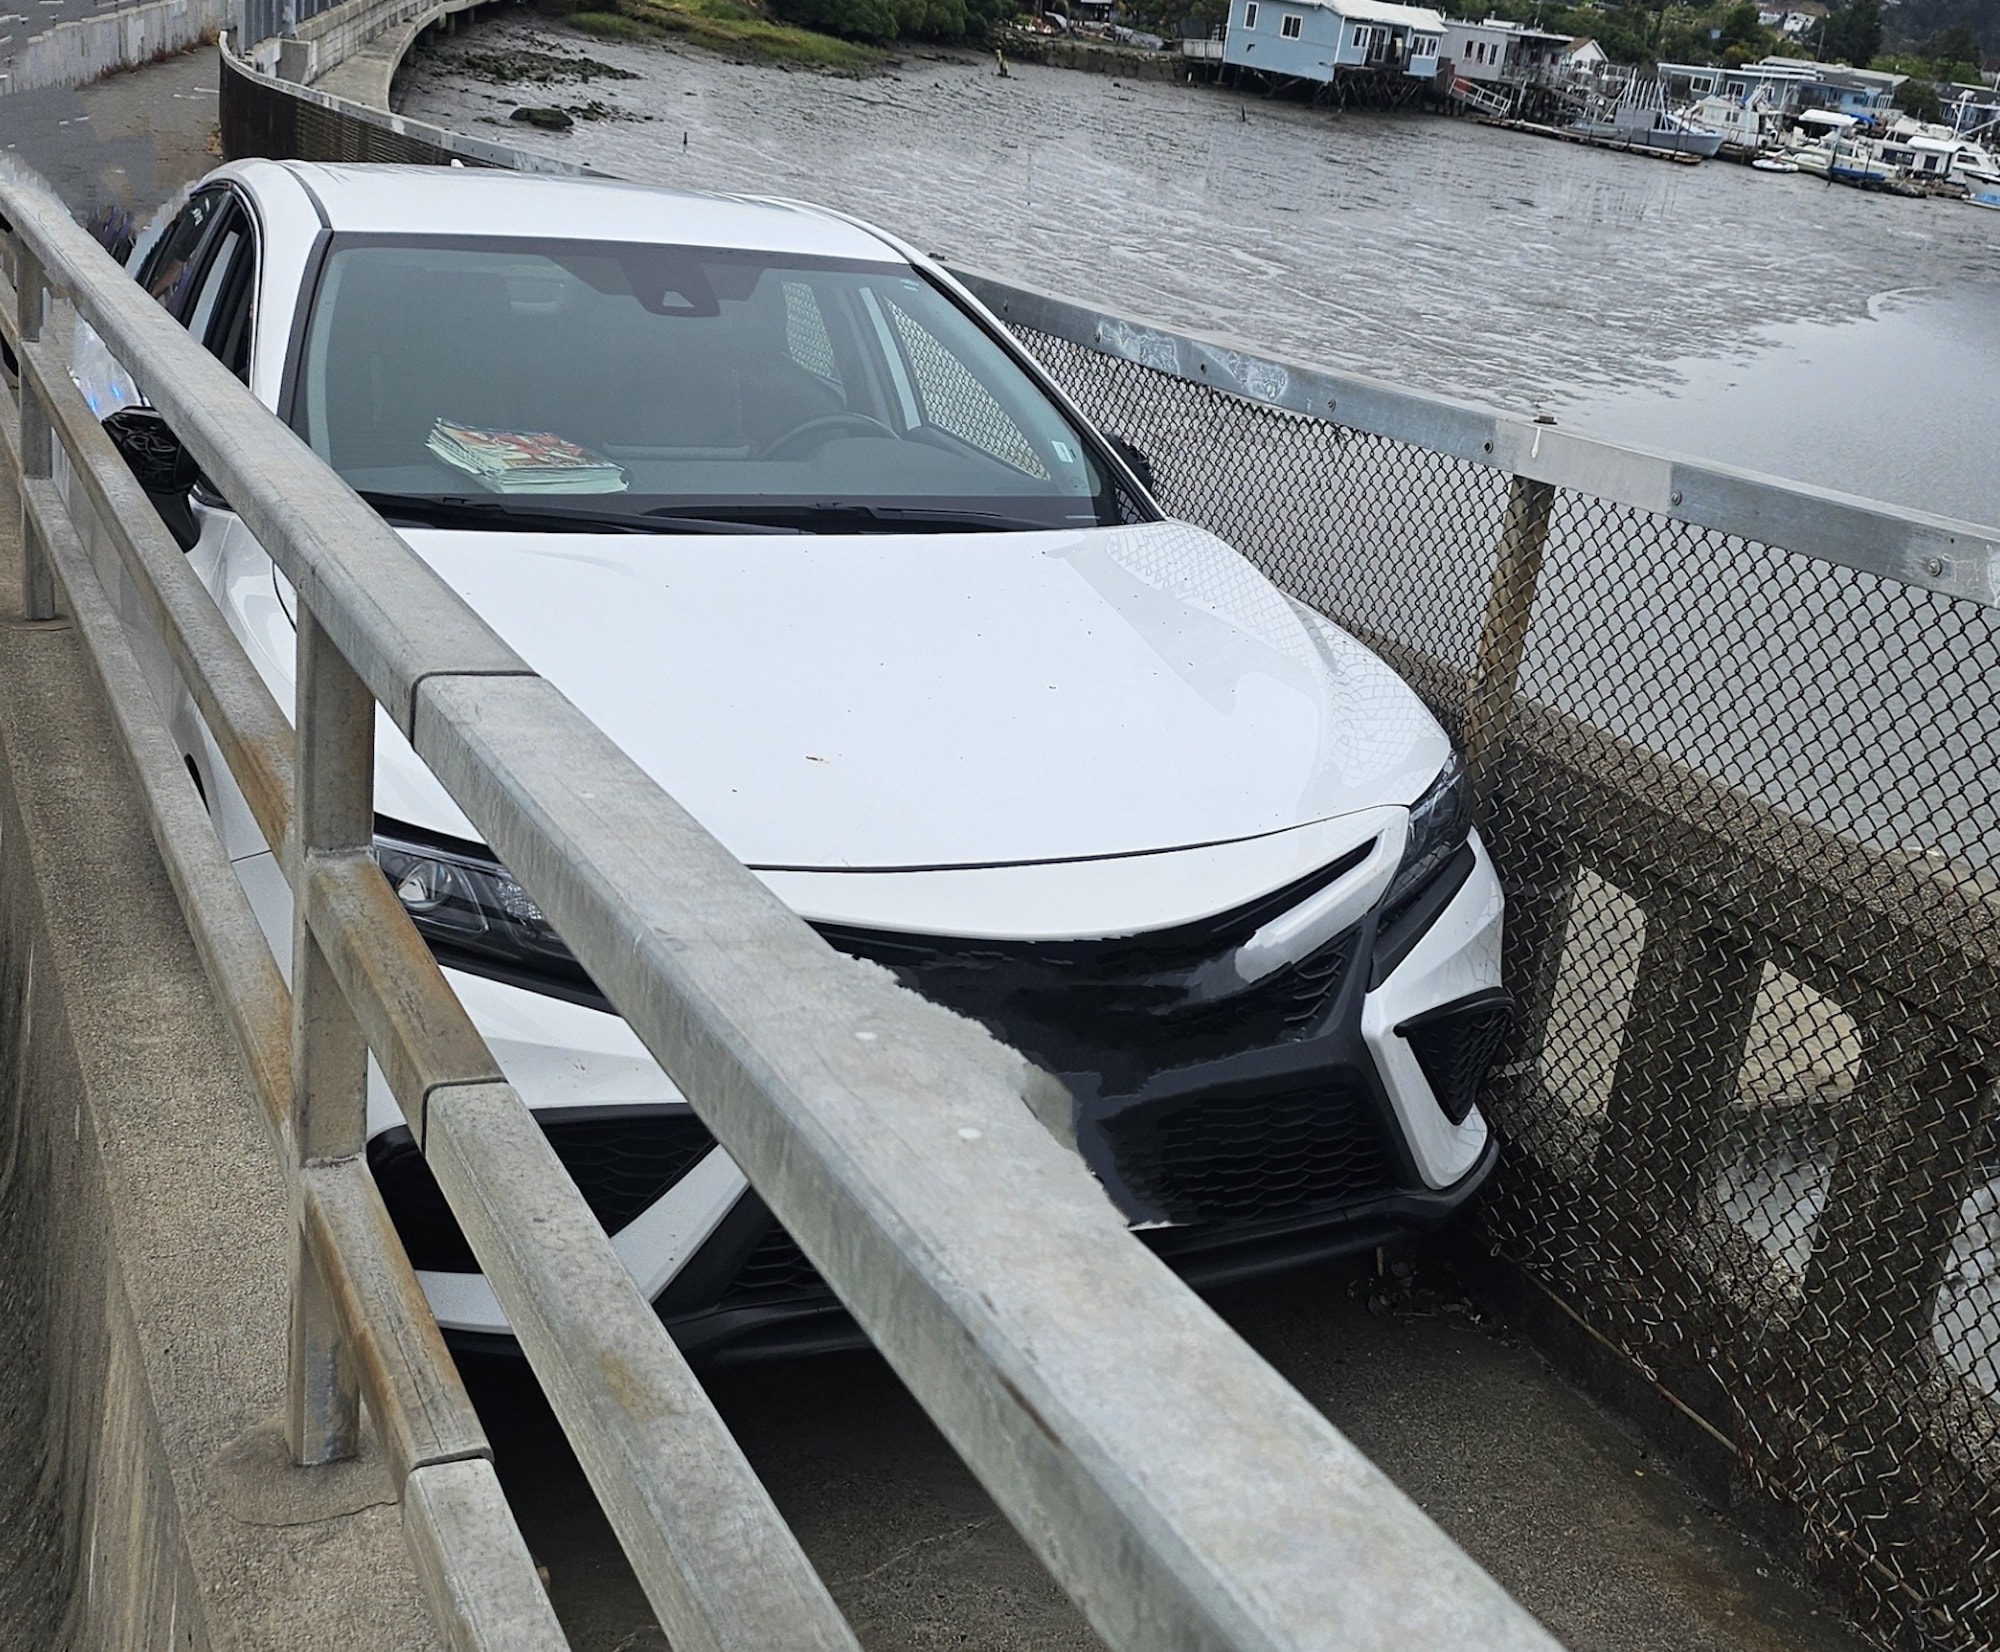 DUI Driver Arrested After Getting Stuck on Pedestrian Bridge in California